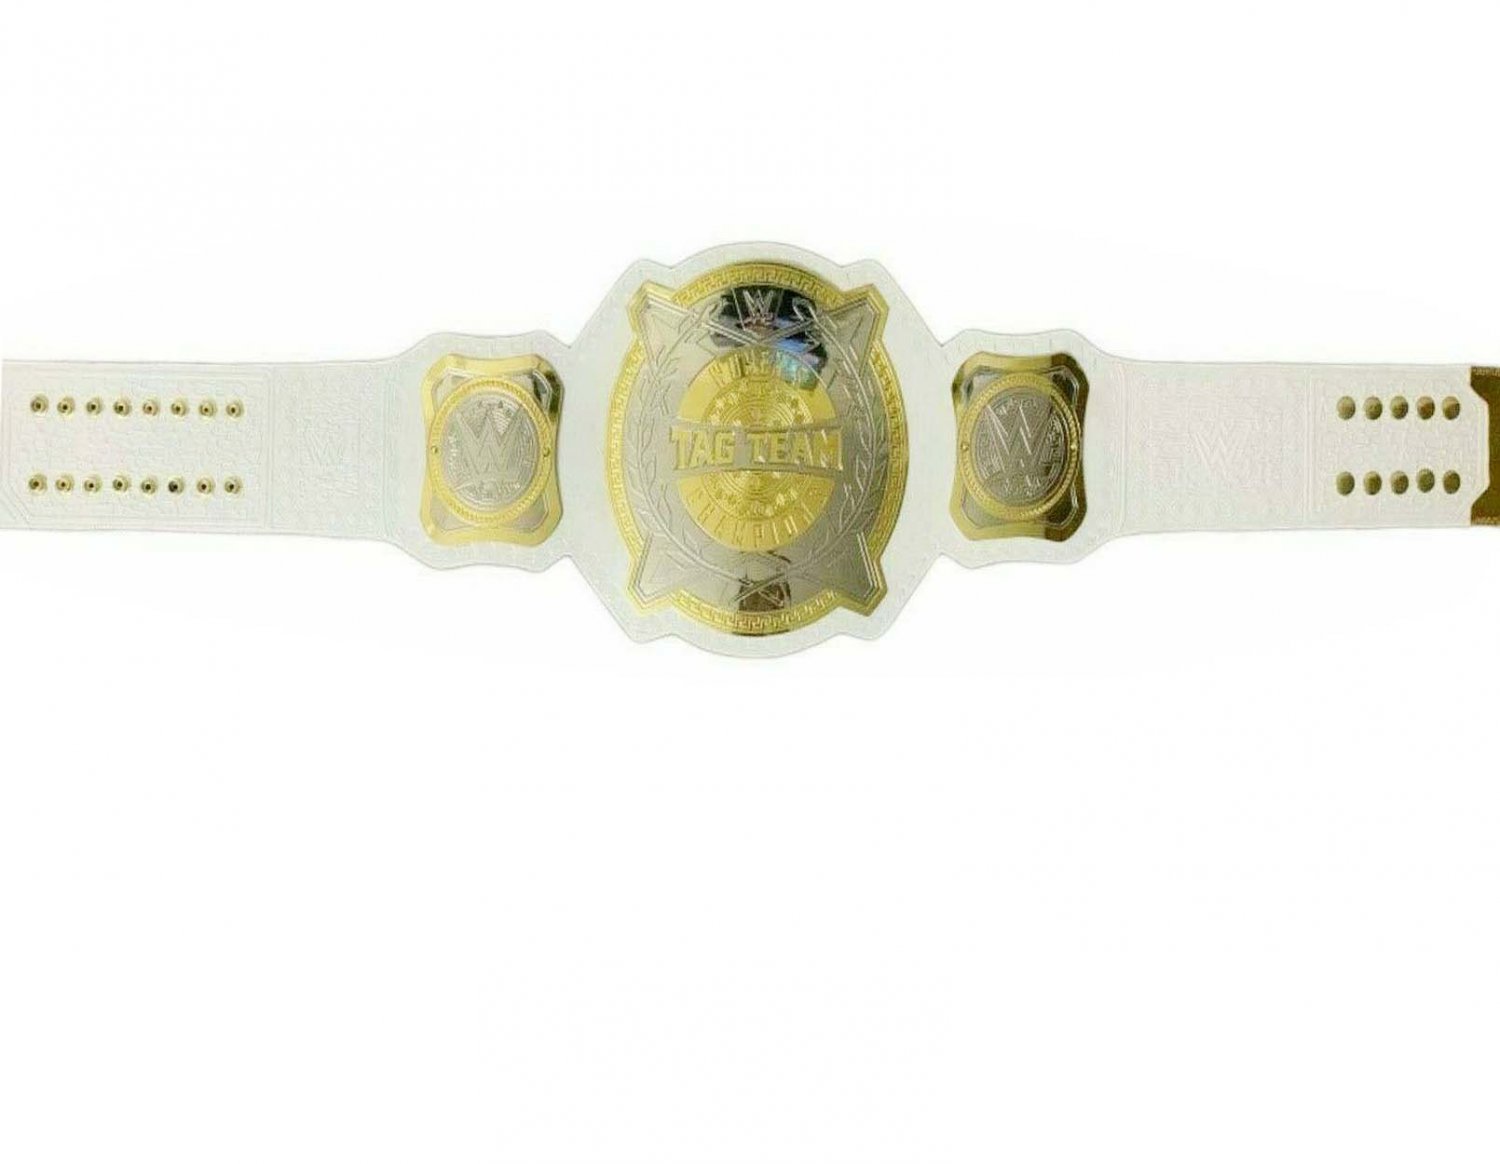 WOMENS TAG TEAM WRESTLING CHAMPIONSHIP BELT ADULT SIZE WHITE LEATHER STRAP